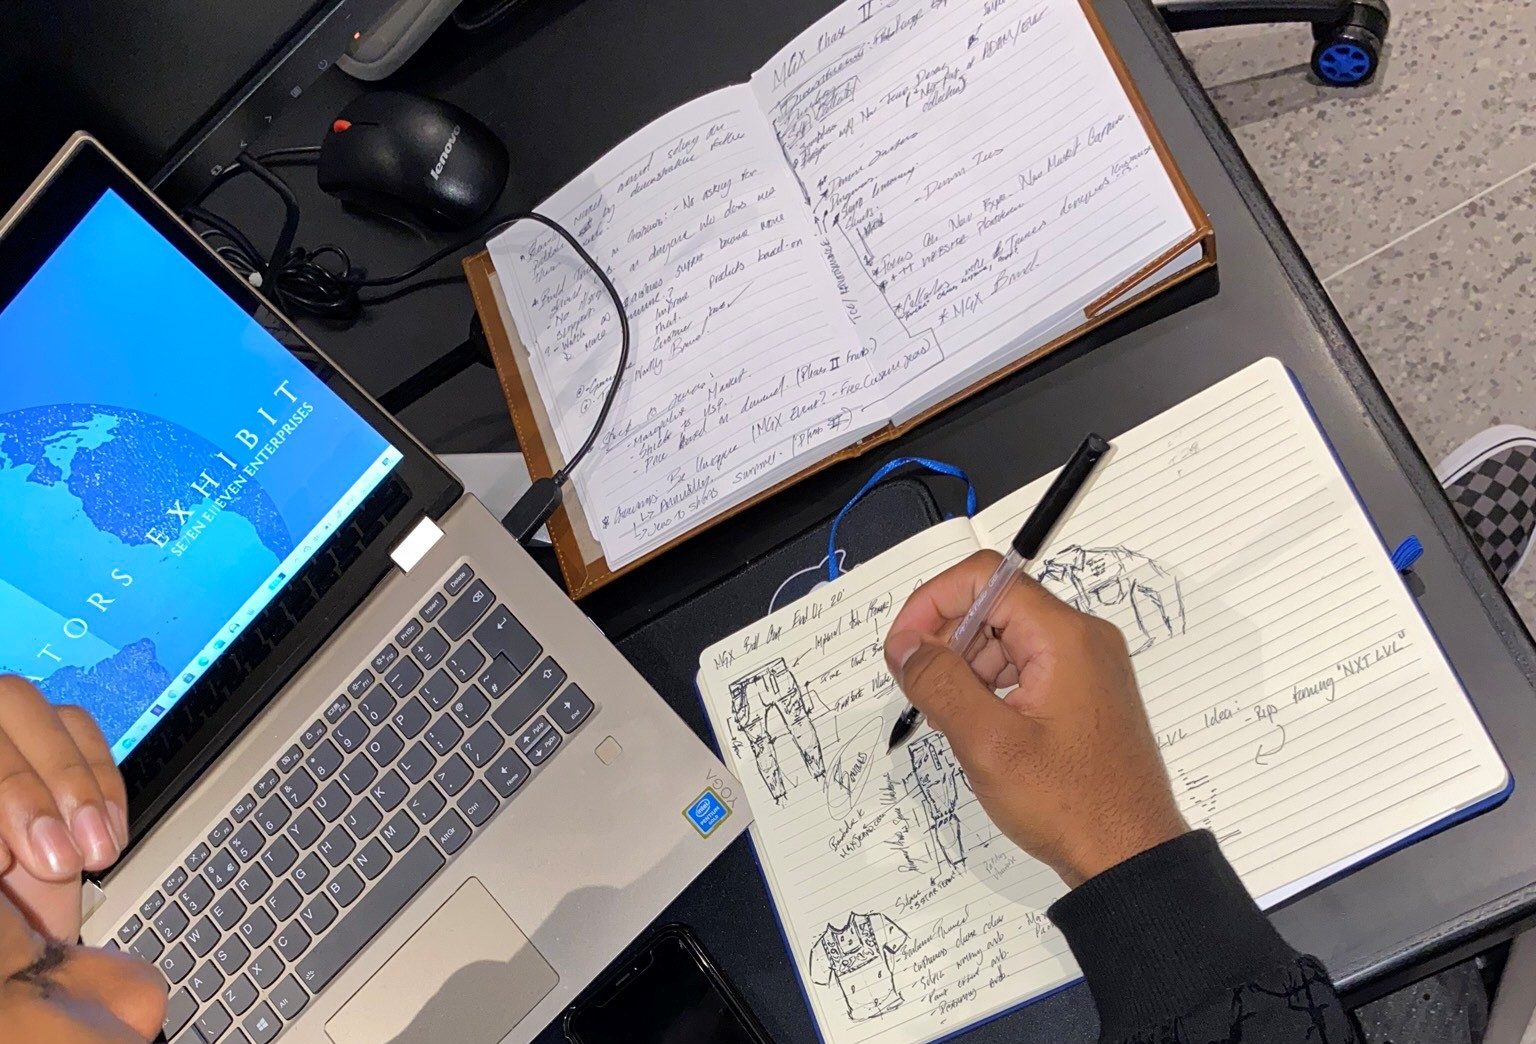 student designing on paper with a notebook and laptop on the desk